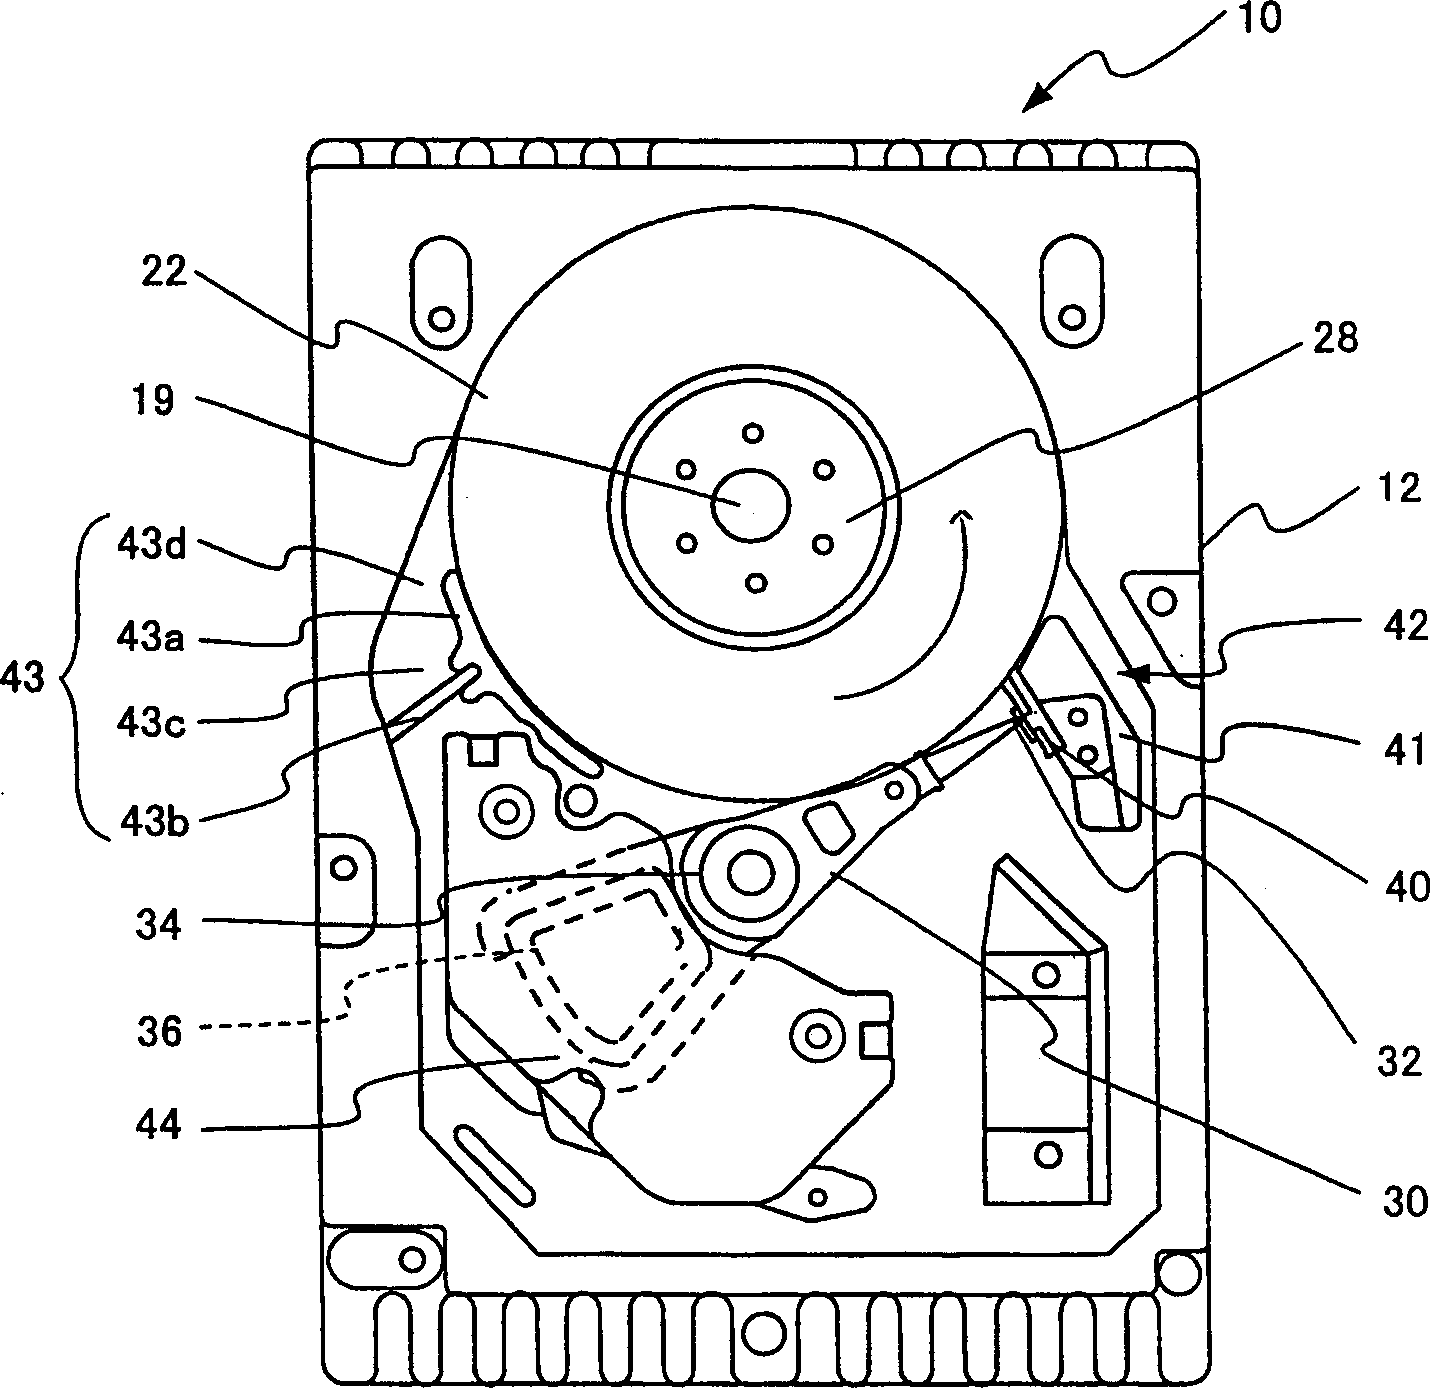 Disc drive, rigid disc drive and casing for rigid disc drive